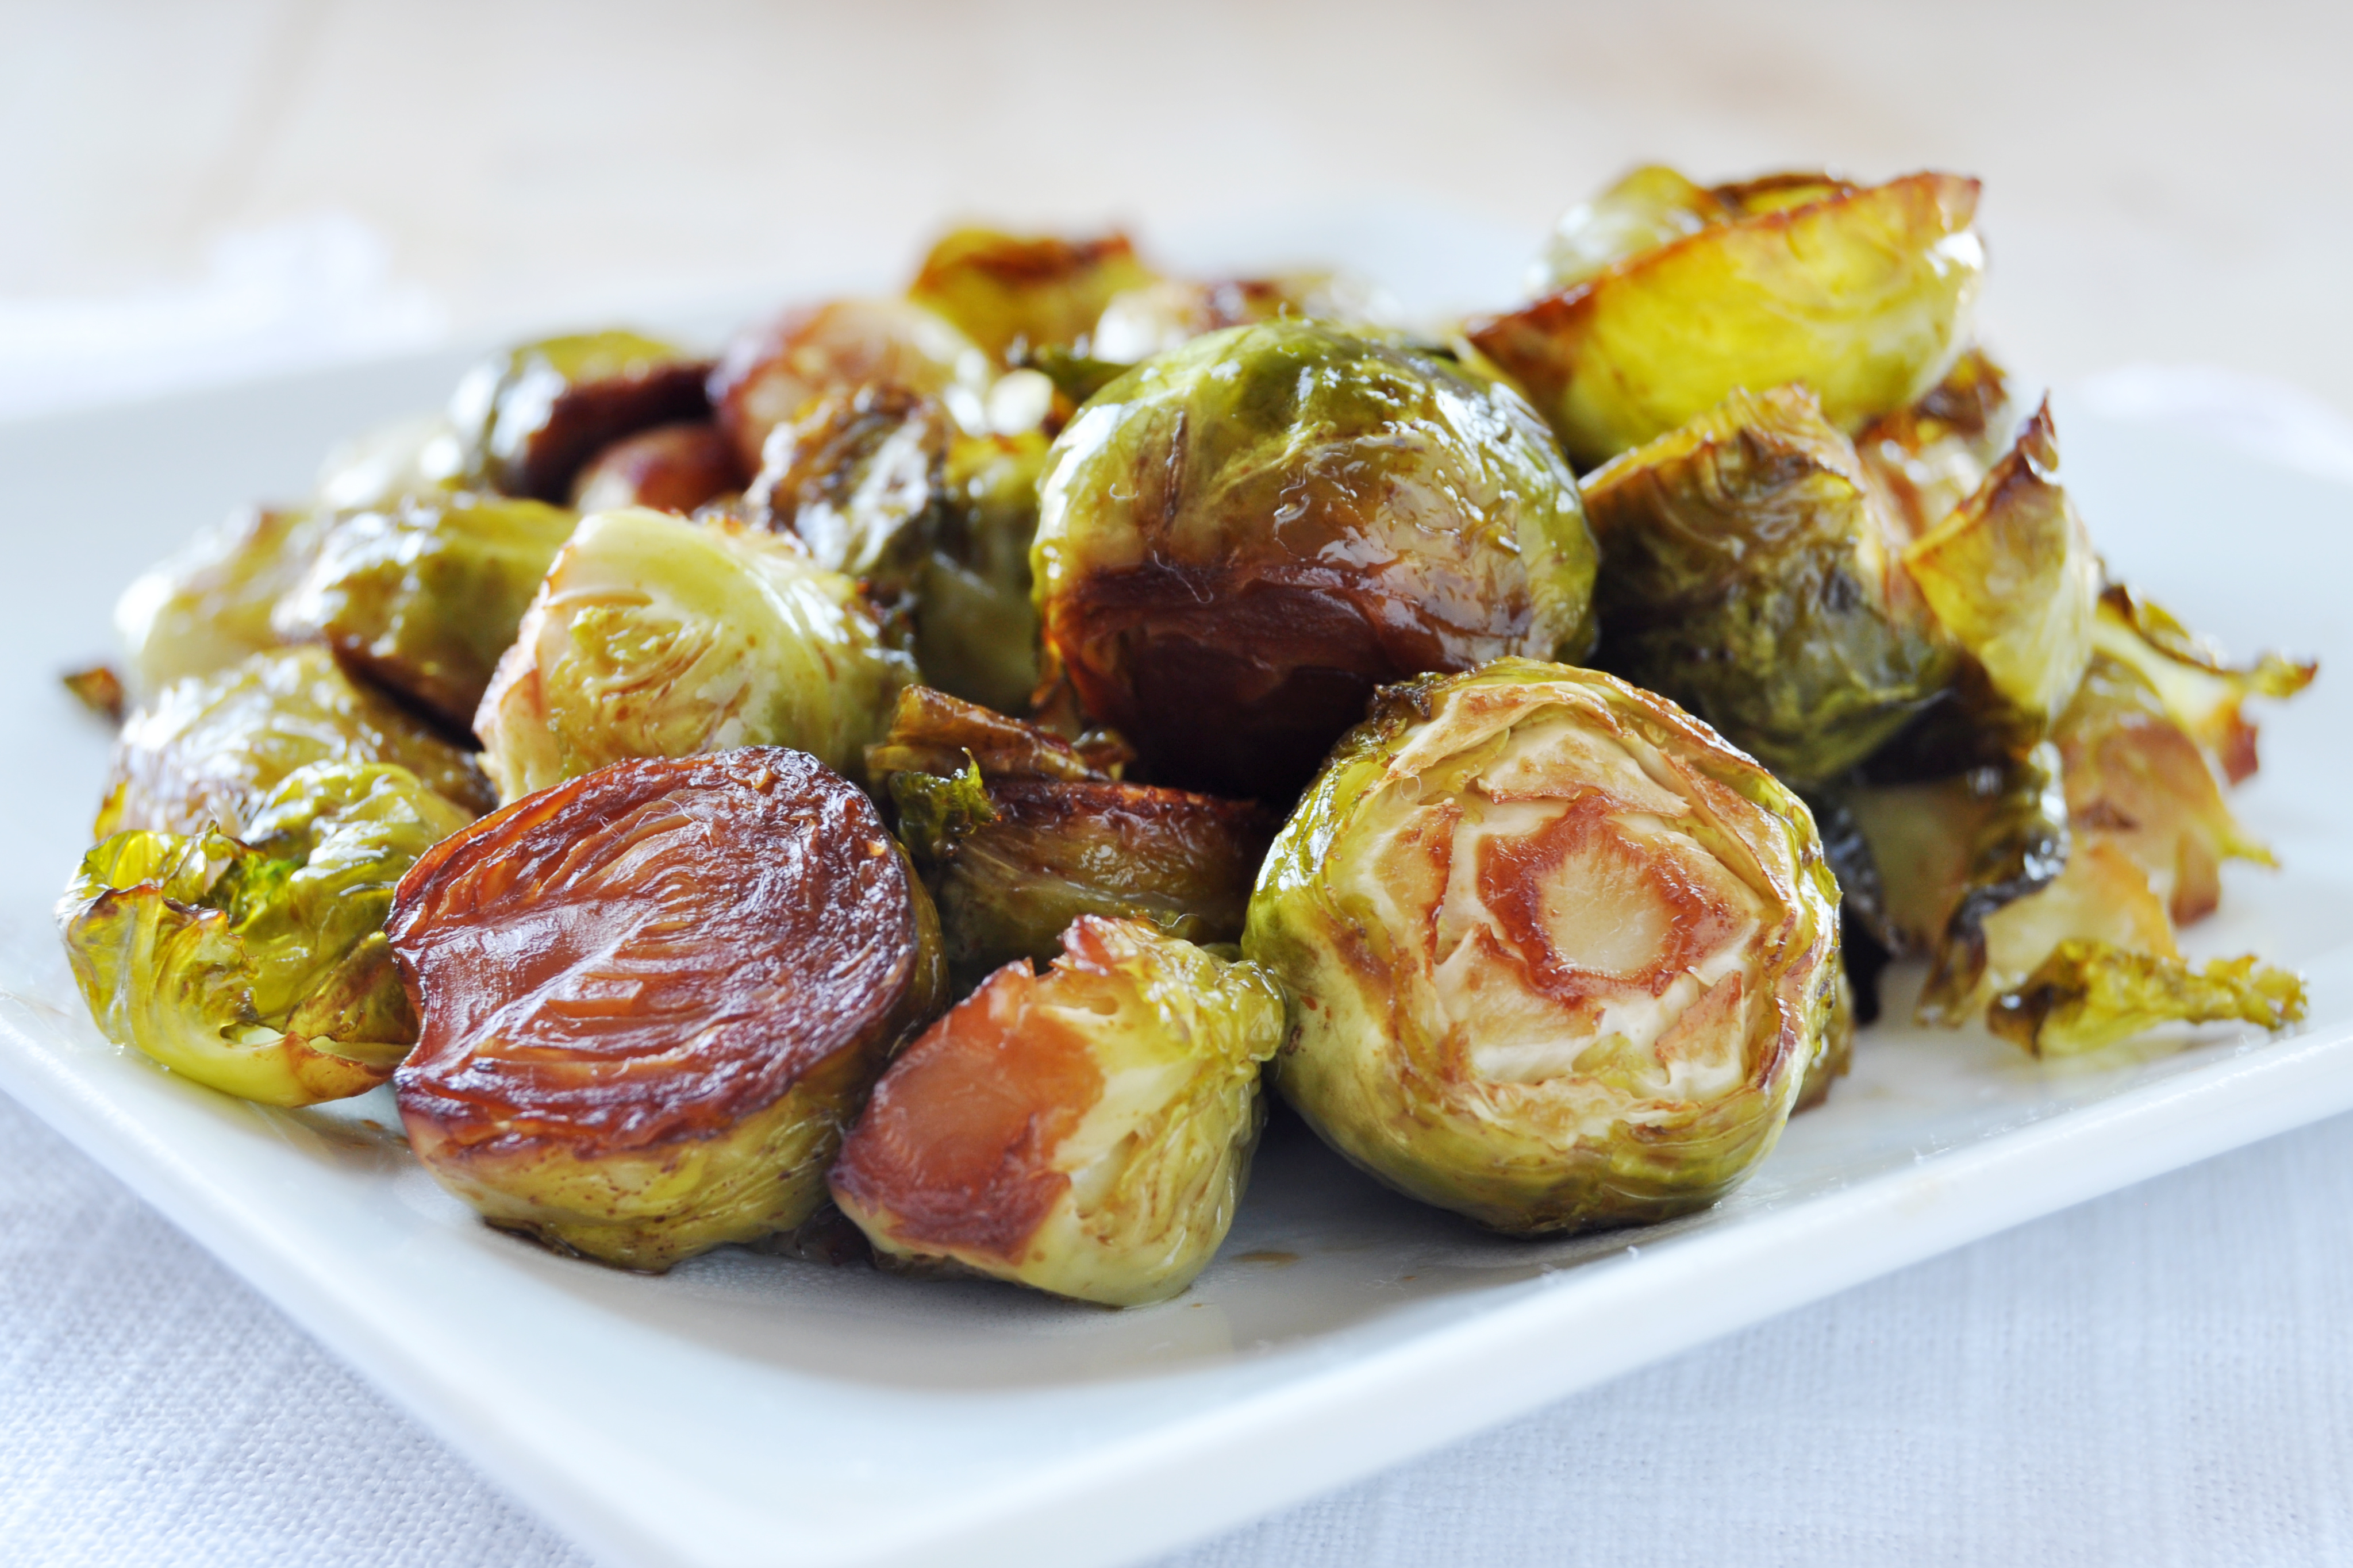 Smoky Maple Roasted Brussel Sprouts Vegan Balsmaic Reduction